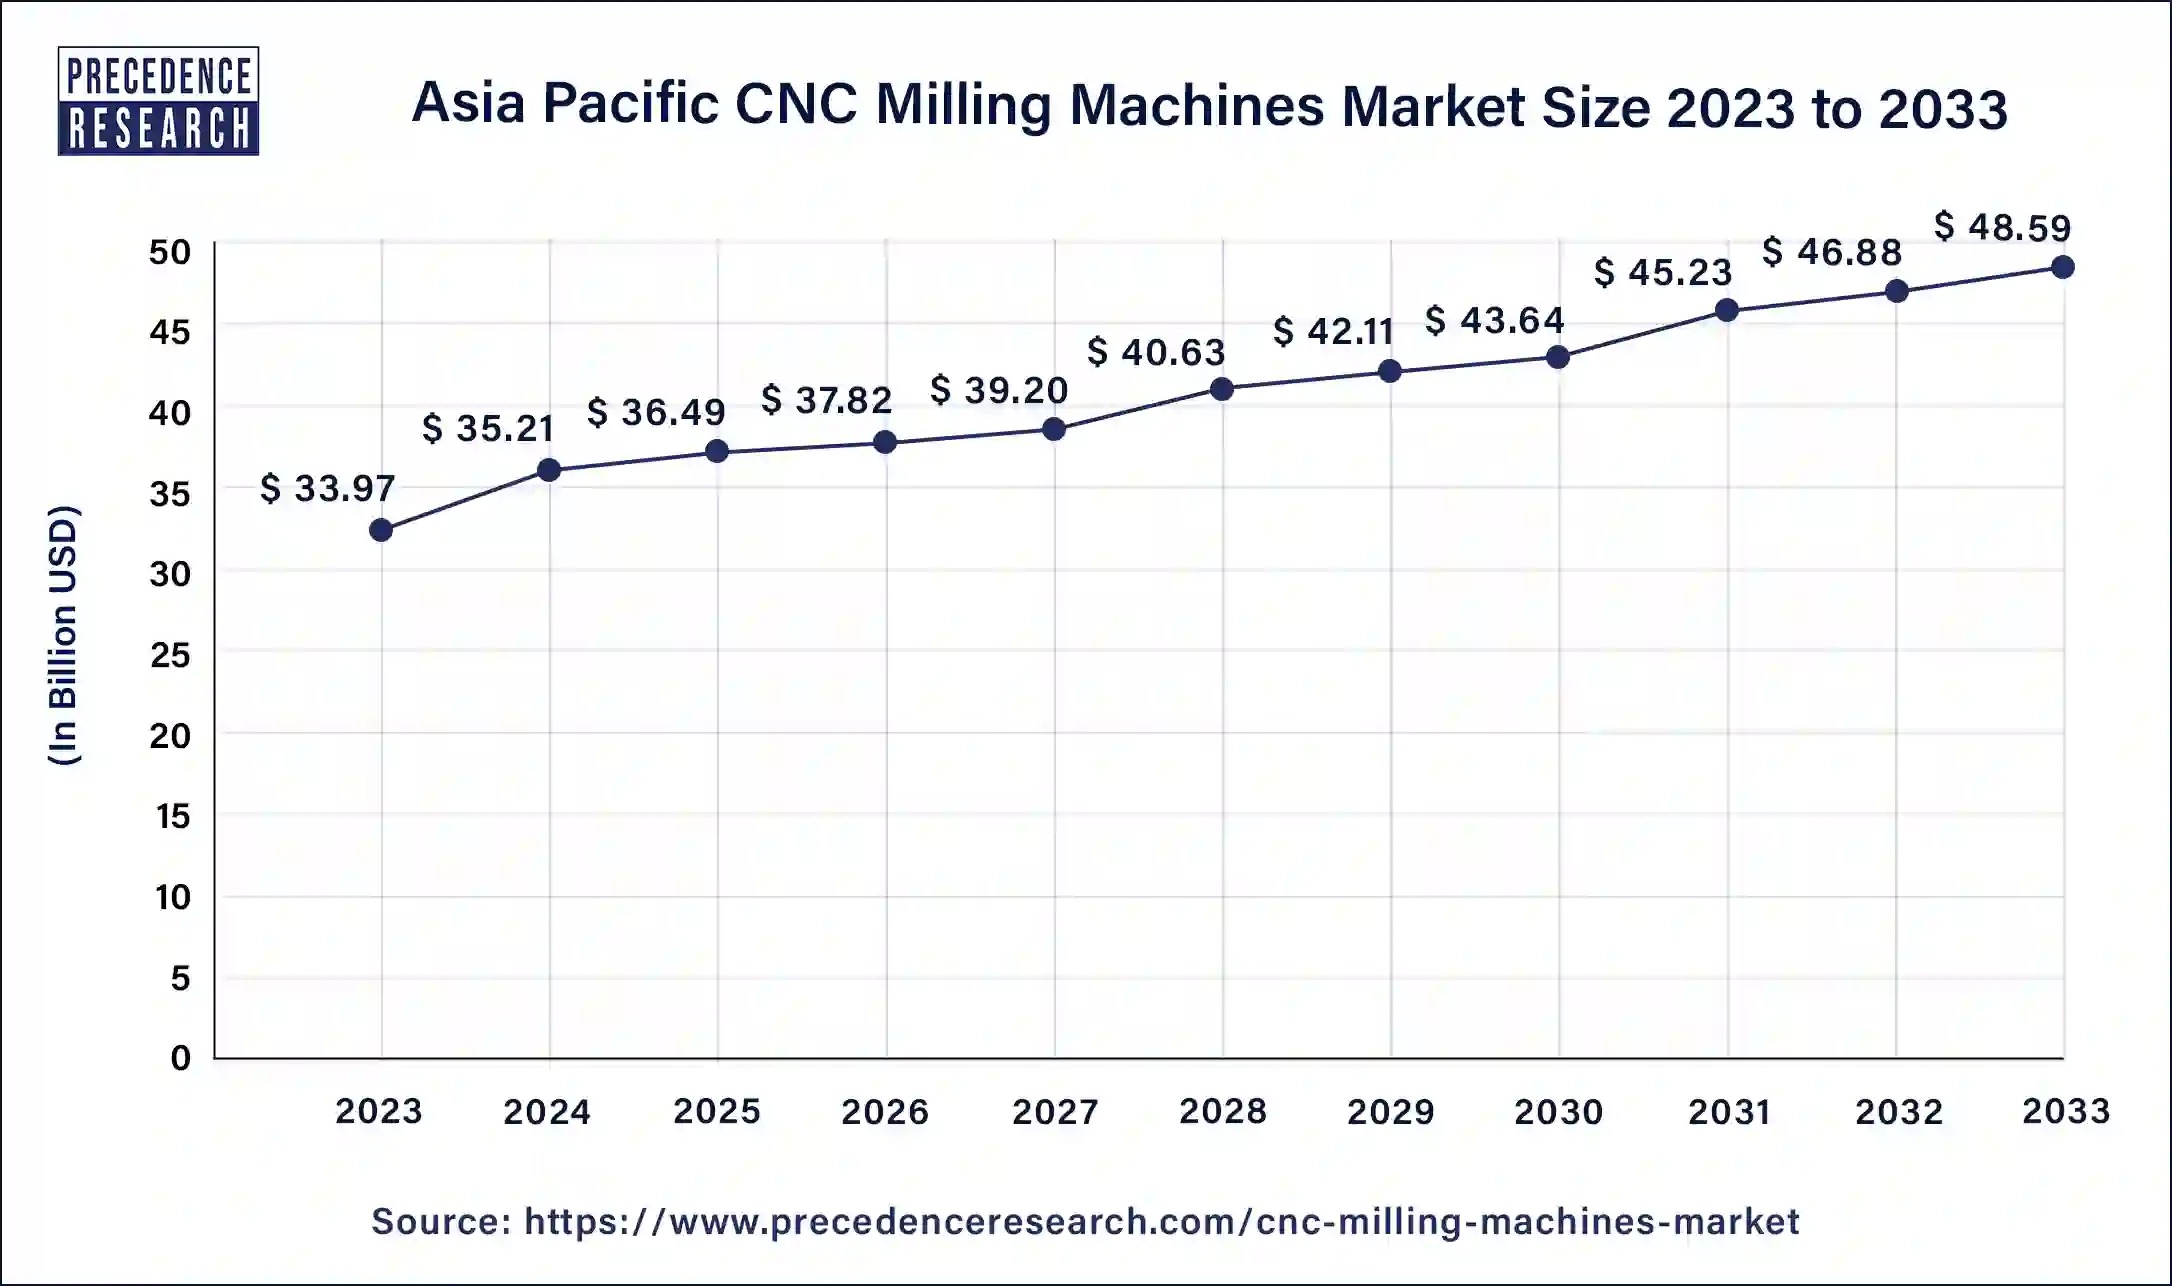 Asia Pacific CNC Milling Machines Market Size 2024 to 2033